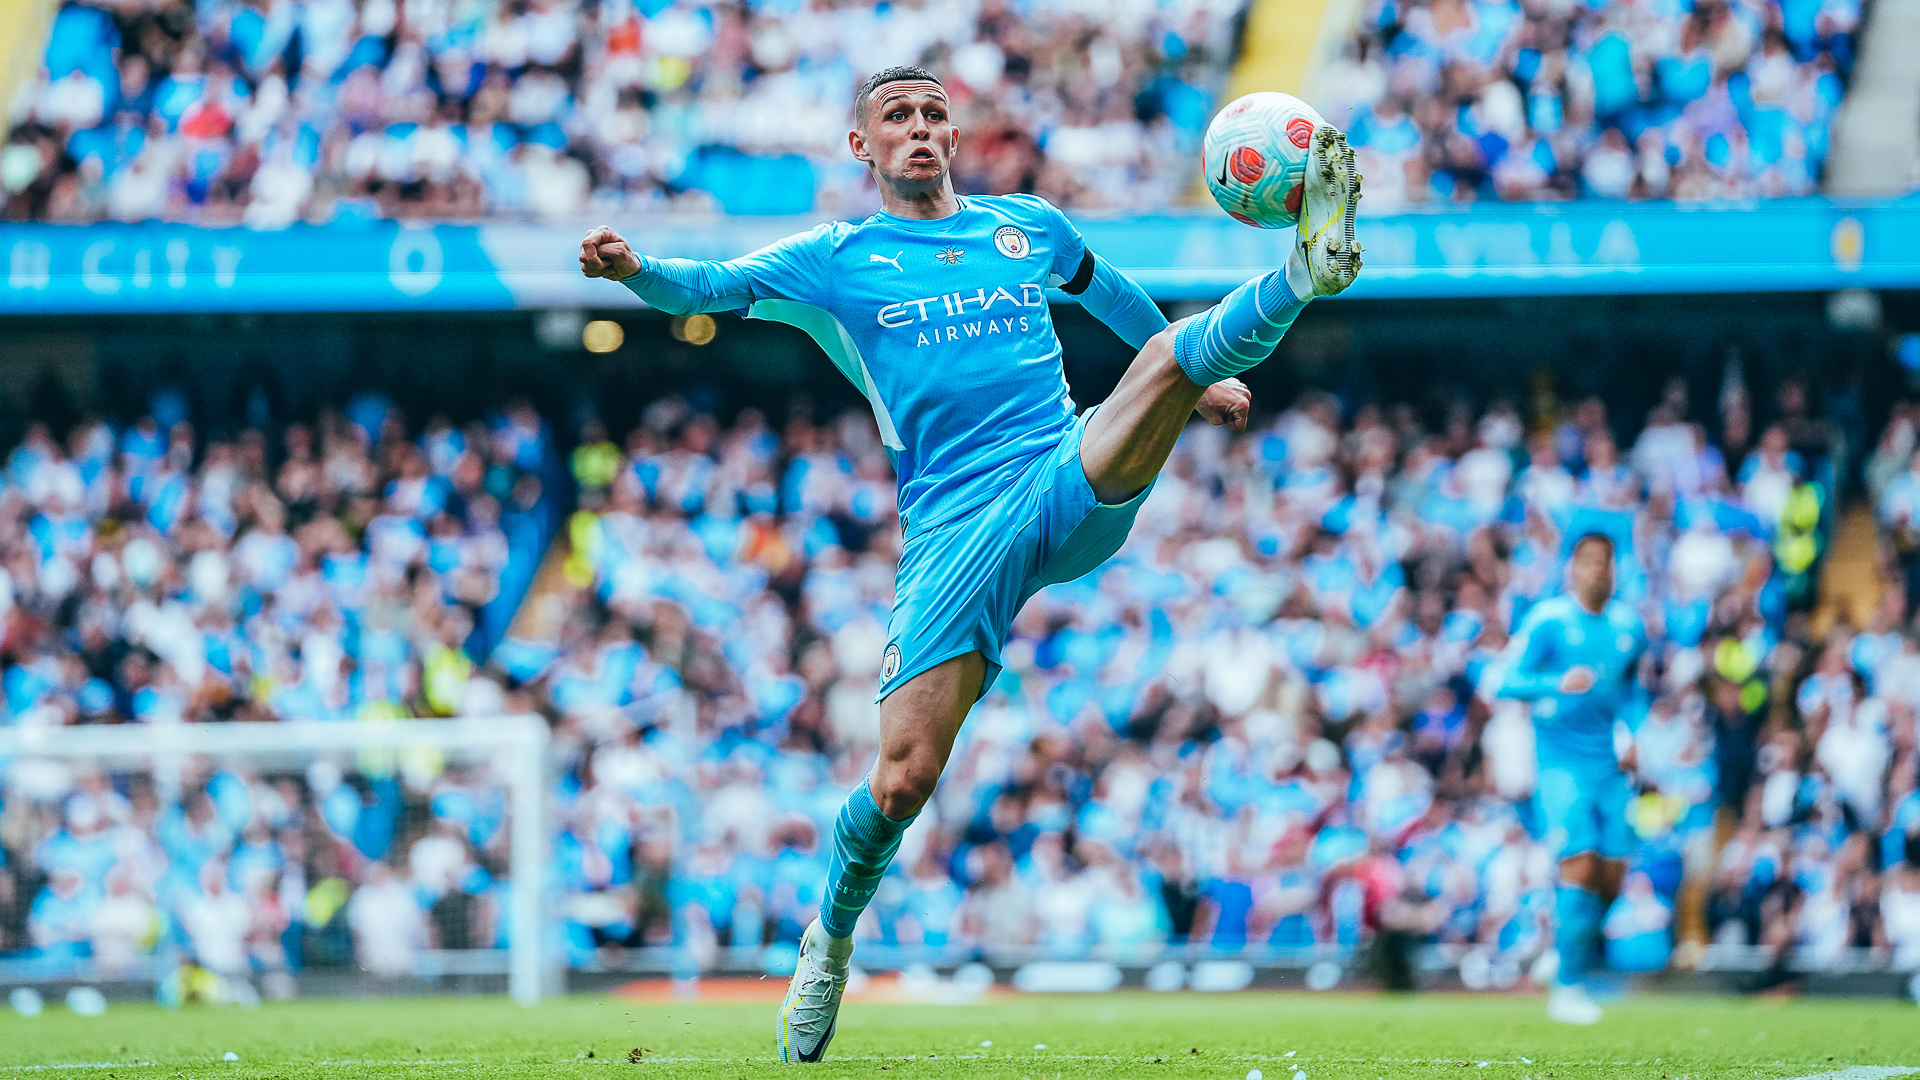 ONE OF OUR OWN: Phil Foden tak lelah berusaha